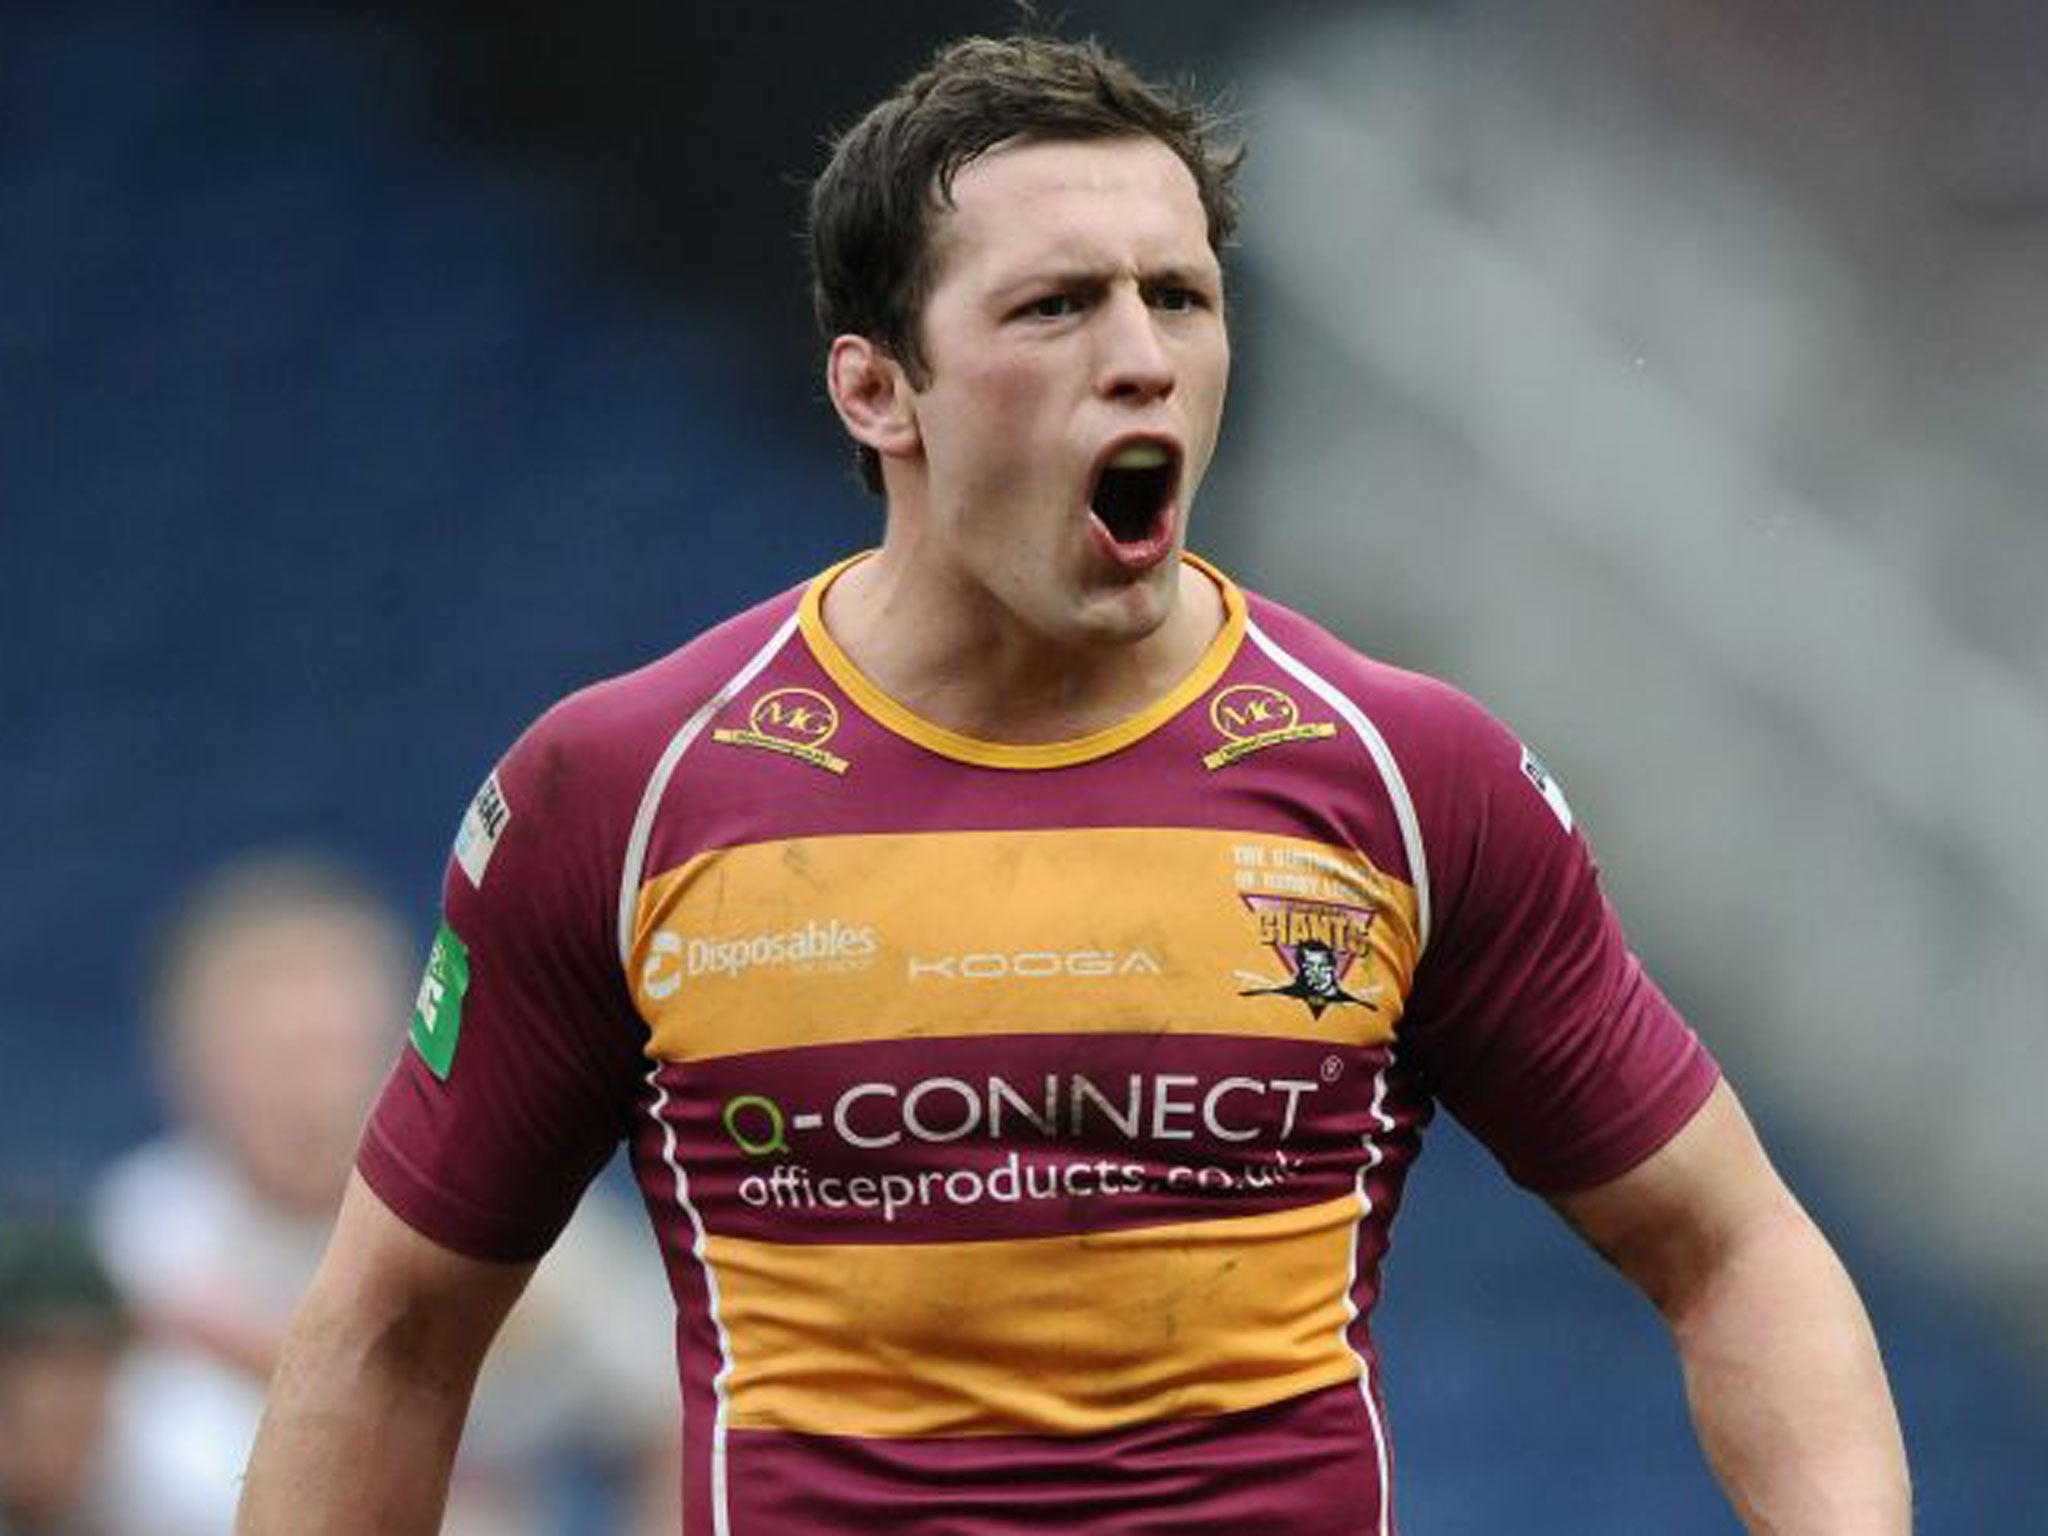 Shaun Lunt scored two tries for Huddersfield against Hull KR